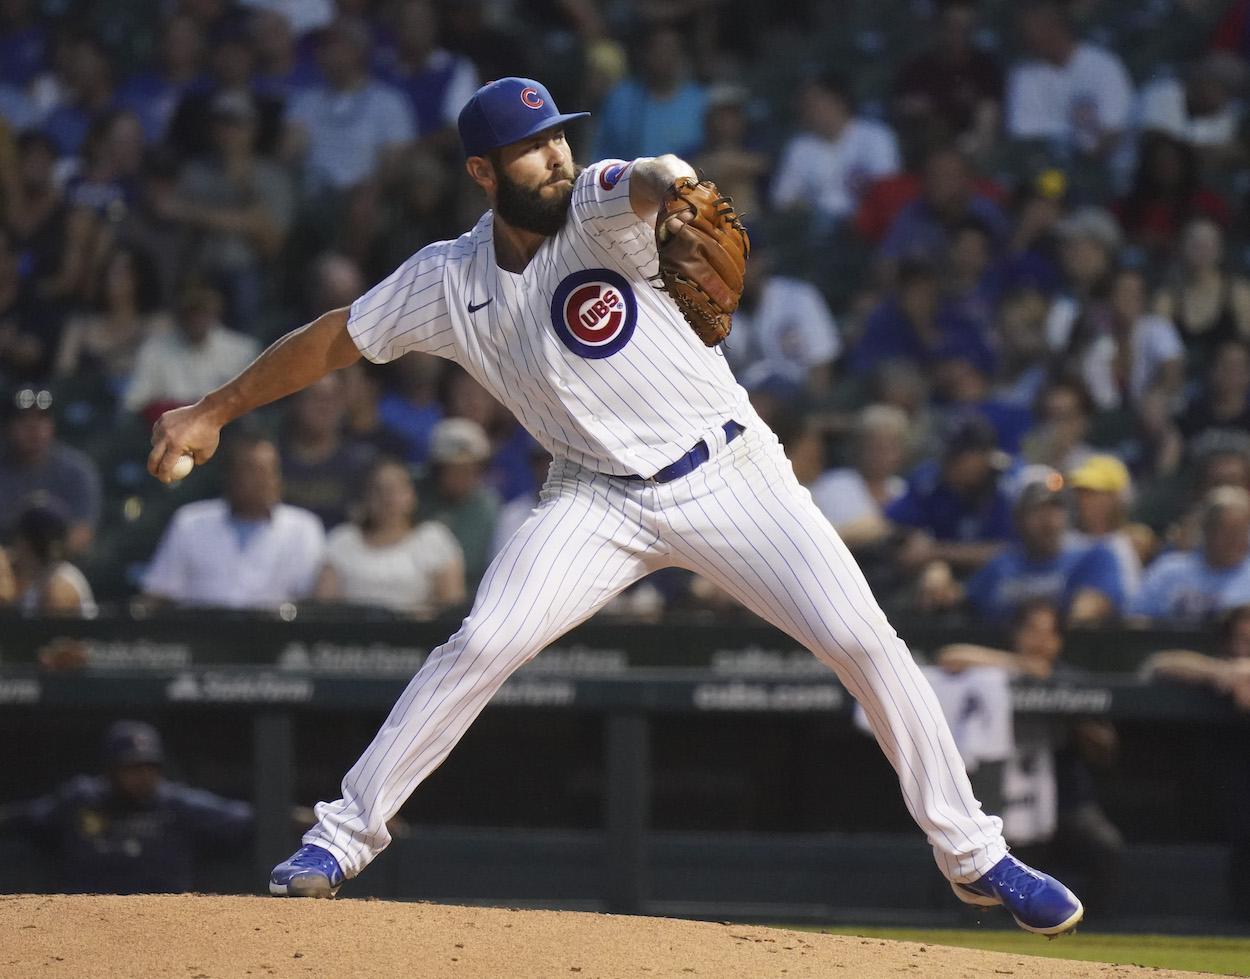 Padres Pitcher Jake Arrieta Has an 8-Figure Net Worth Despite His Recent Terrible Performances on the Mound